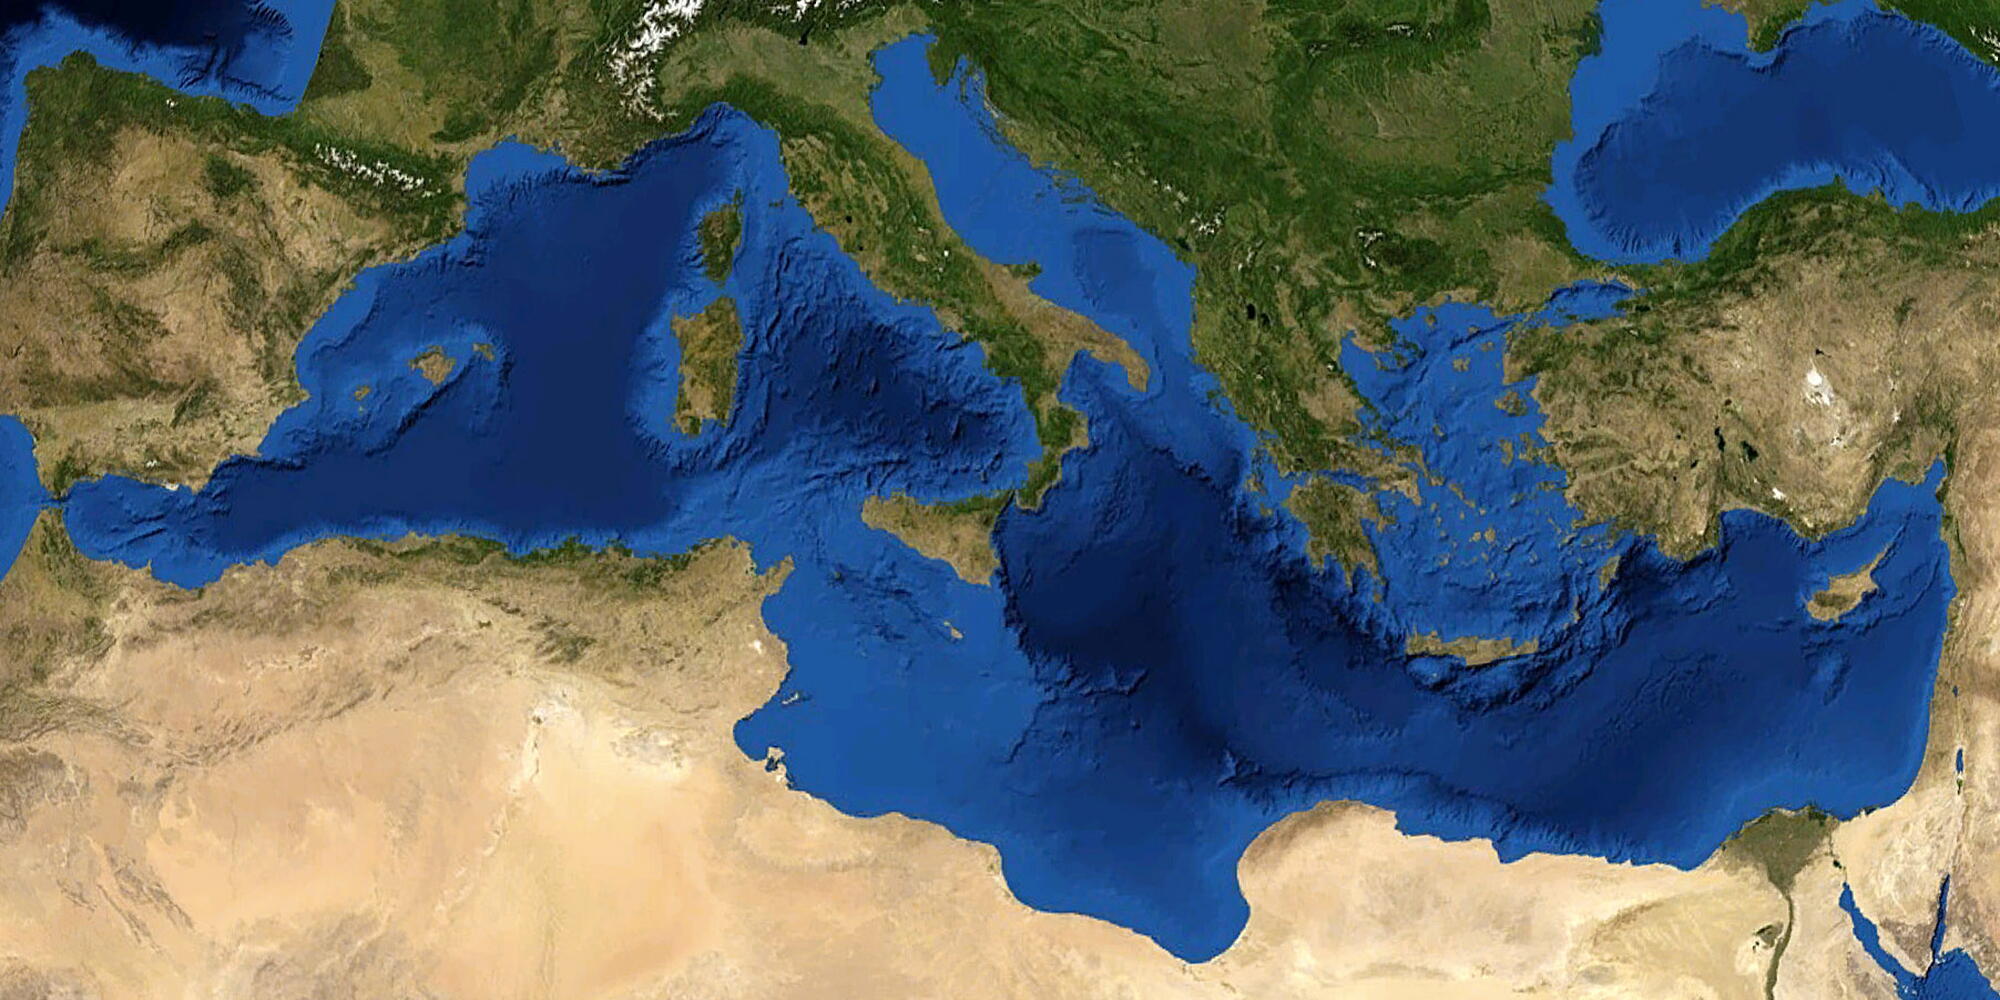 Europe and the Mediterranean